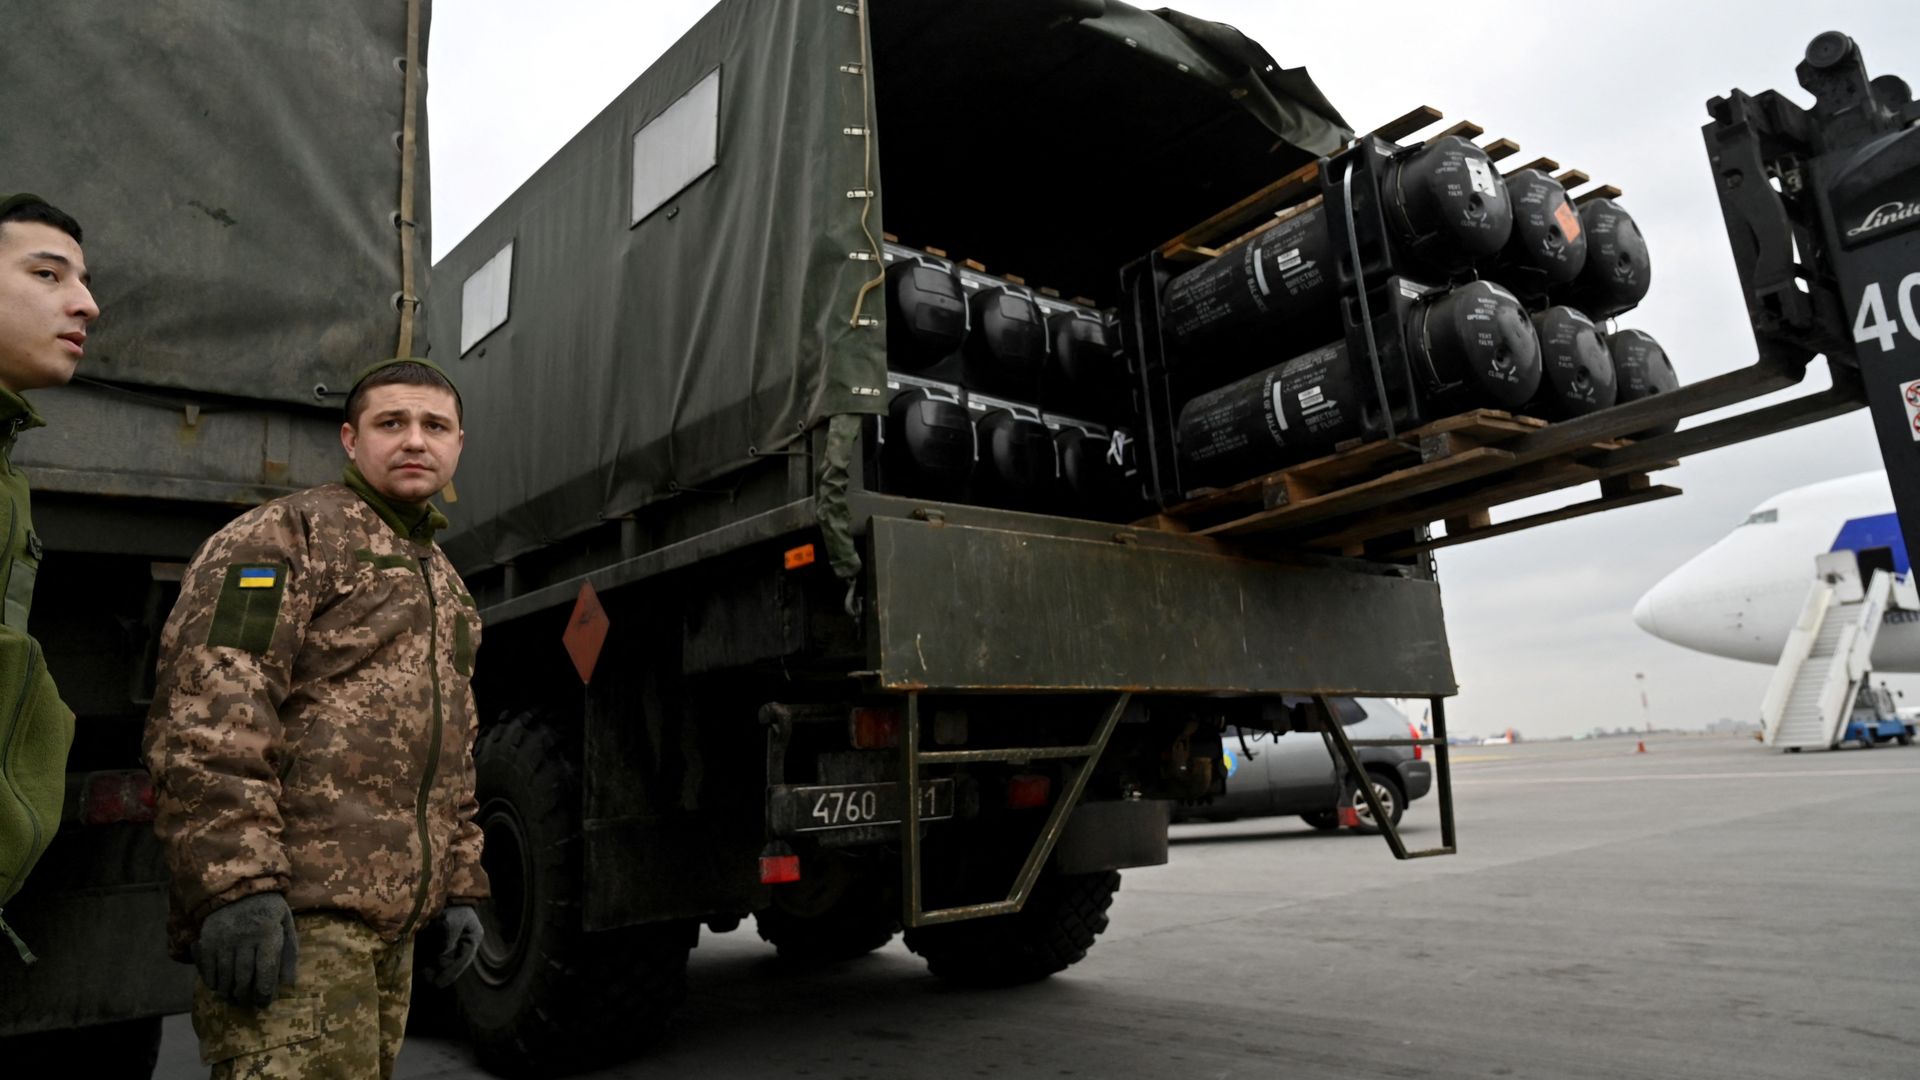 U.S.-made Javelin anti-tank systems are seen being unloaded at Kyiv's airport before Russia's invasion.